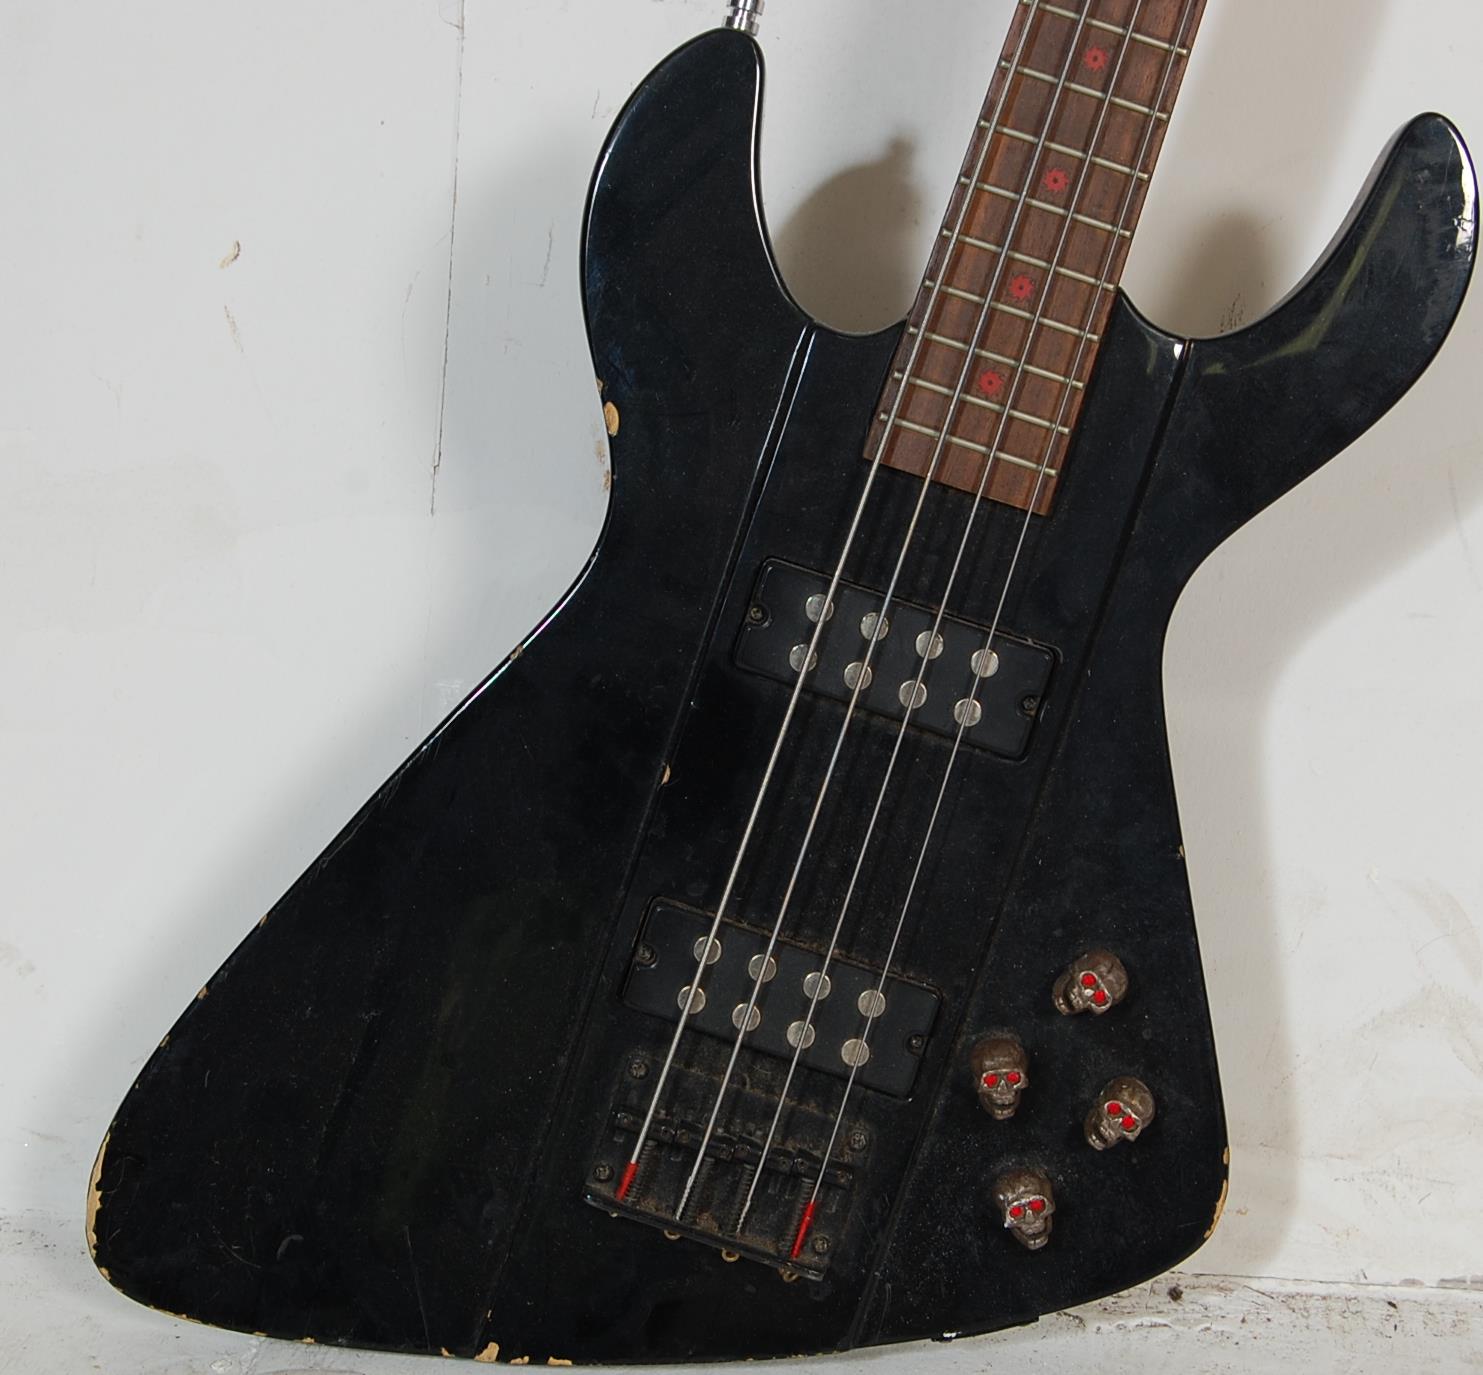 VINTAGE LATE 20TH CENTURY DEAN BASS GUITAR - Image 2 of 6